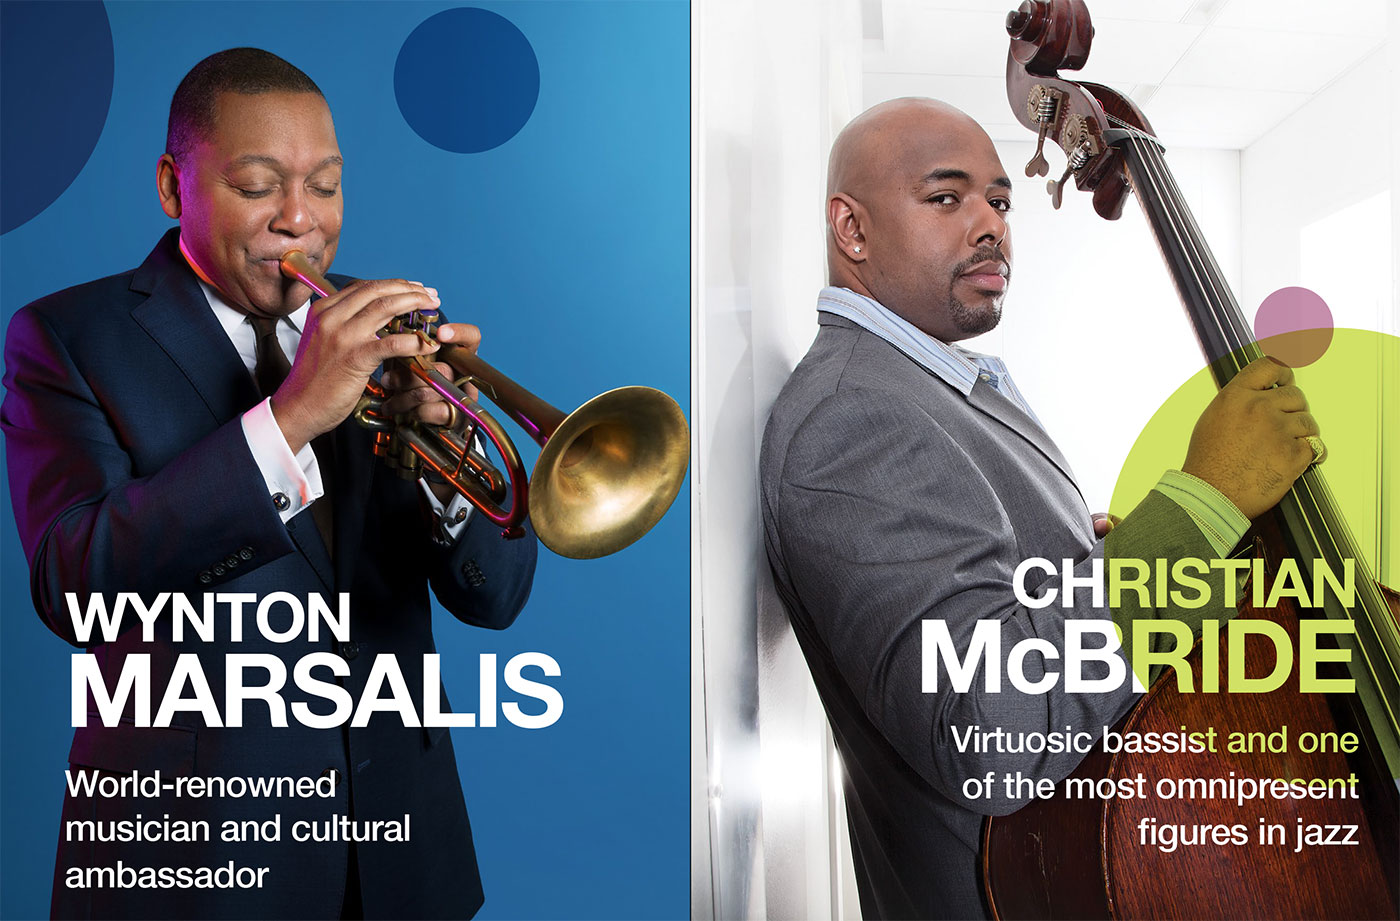 Ralph Pucci 5th Annual Jazz Set featuring Wynton Marsalis and Christian McBride